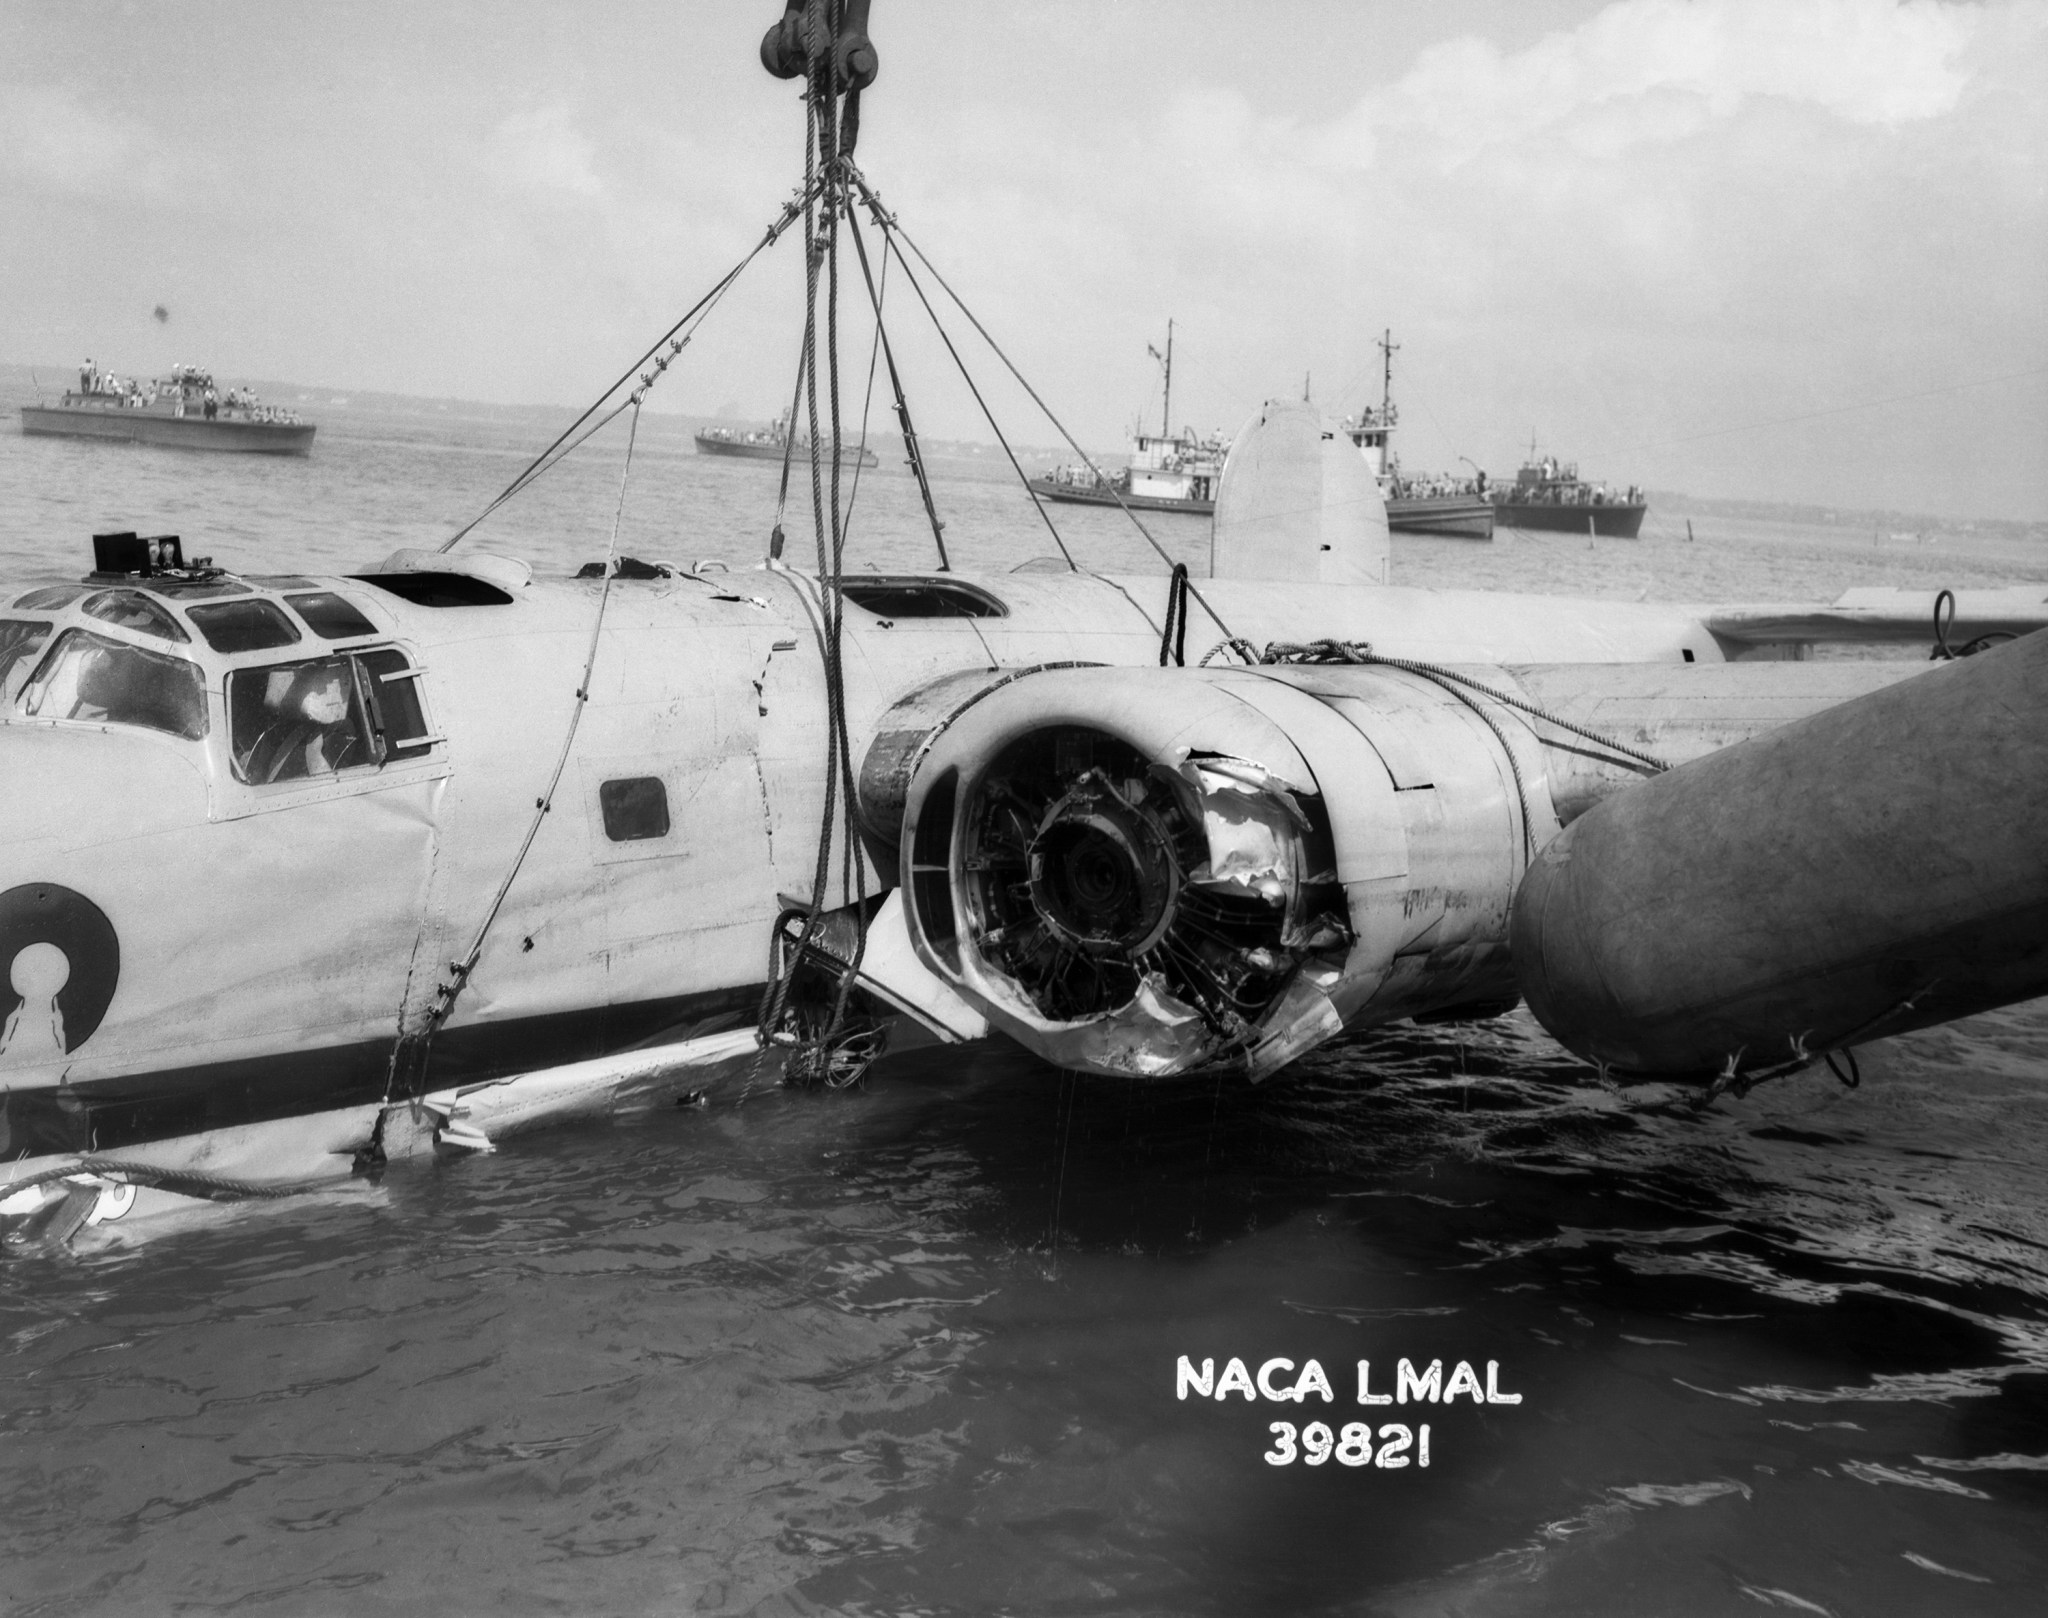 B-24 aircraft after a ditching experiment in the James River